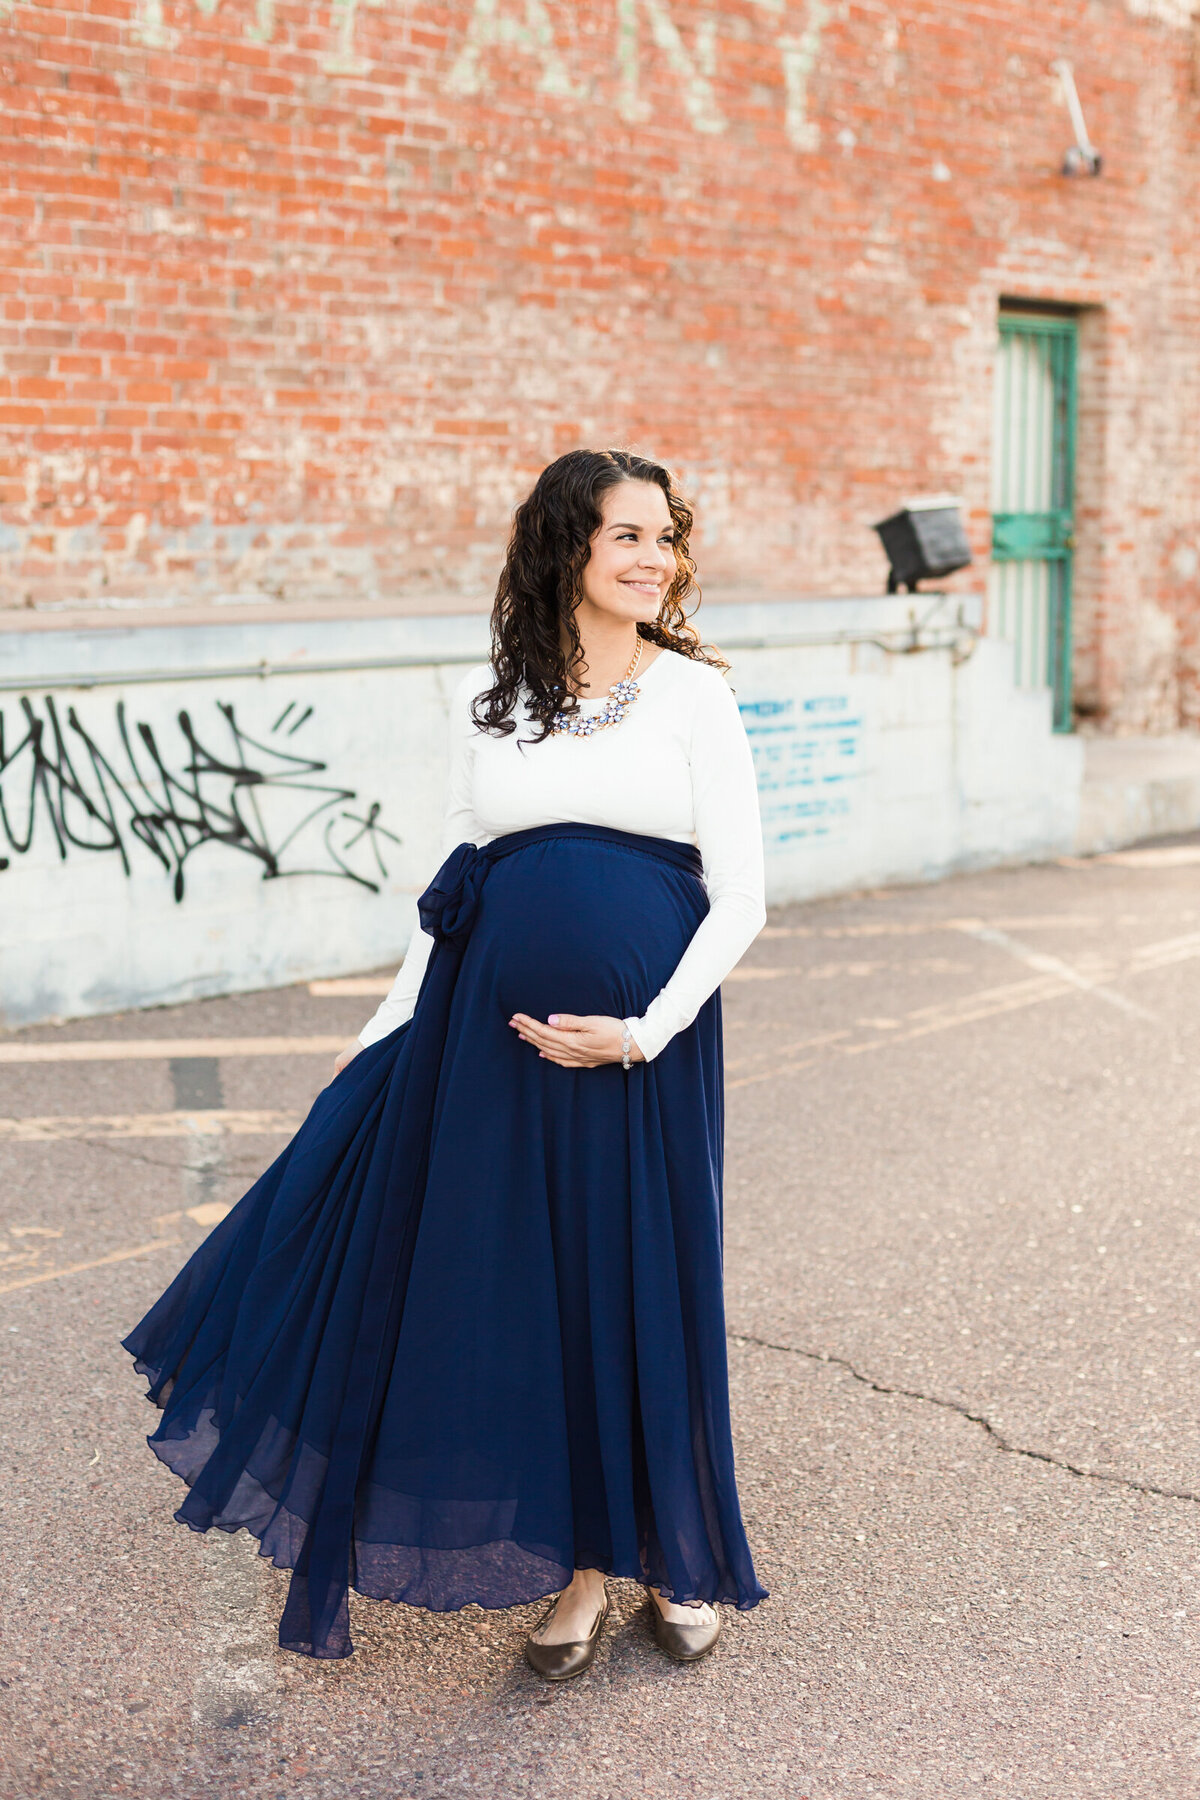 pregnant woman holding baby bump for maternity photography session